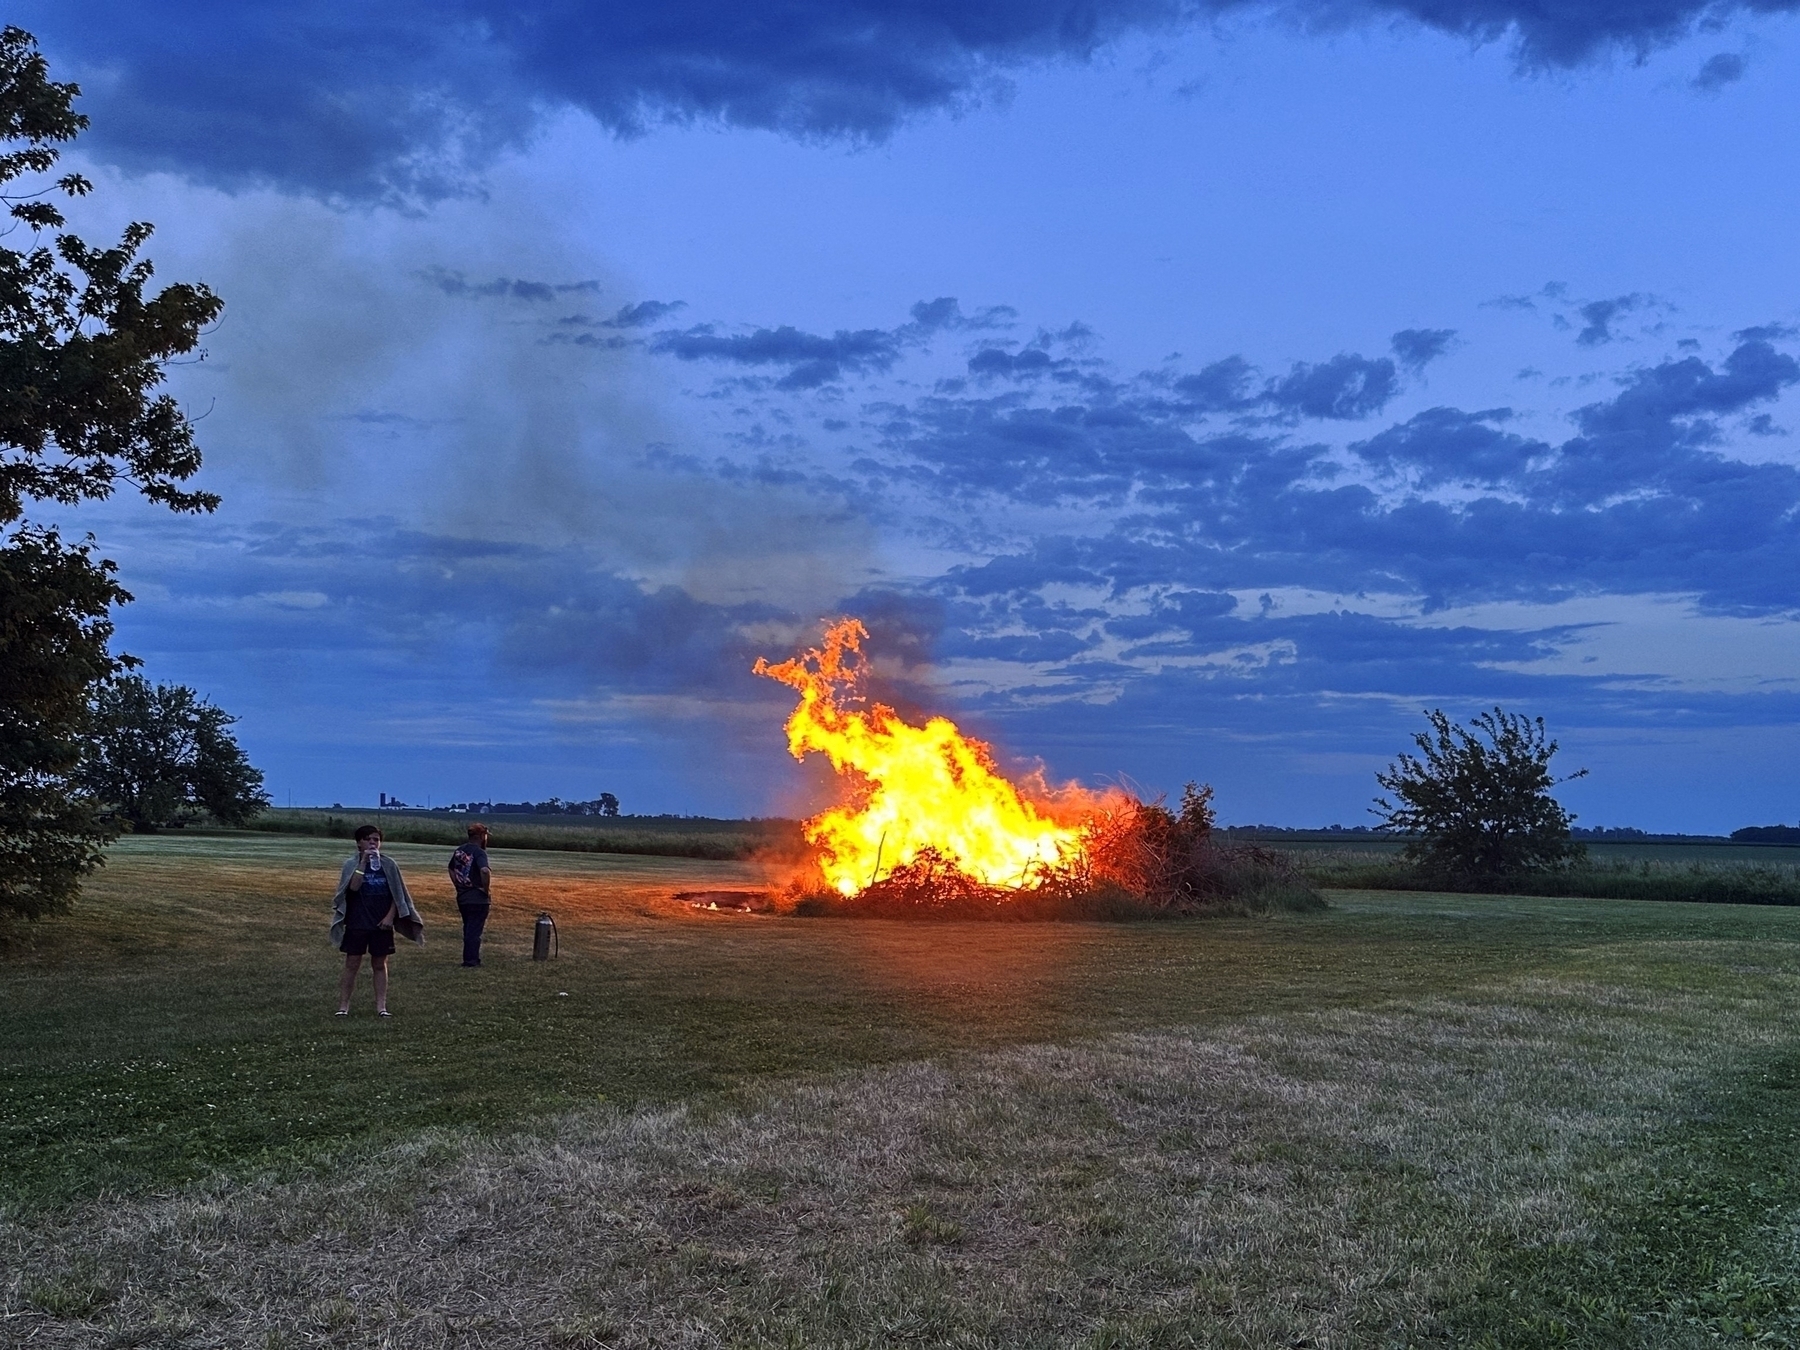 A blazing bonfire illuminates an open grassy field during twilight two people stand near the fire one watching and the other taking a photo with trees and a blue sky in the background